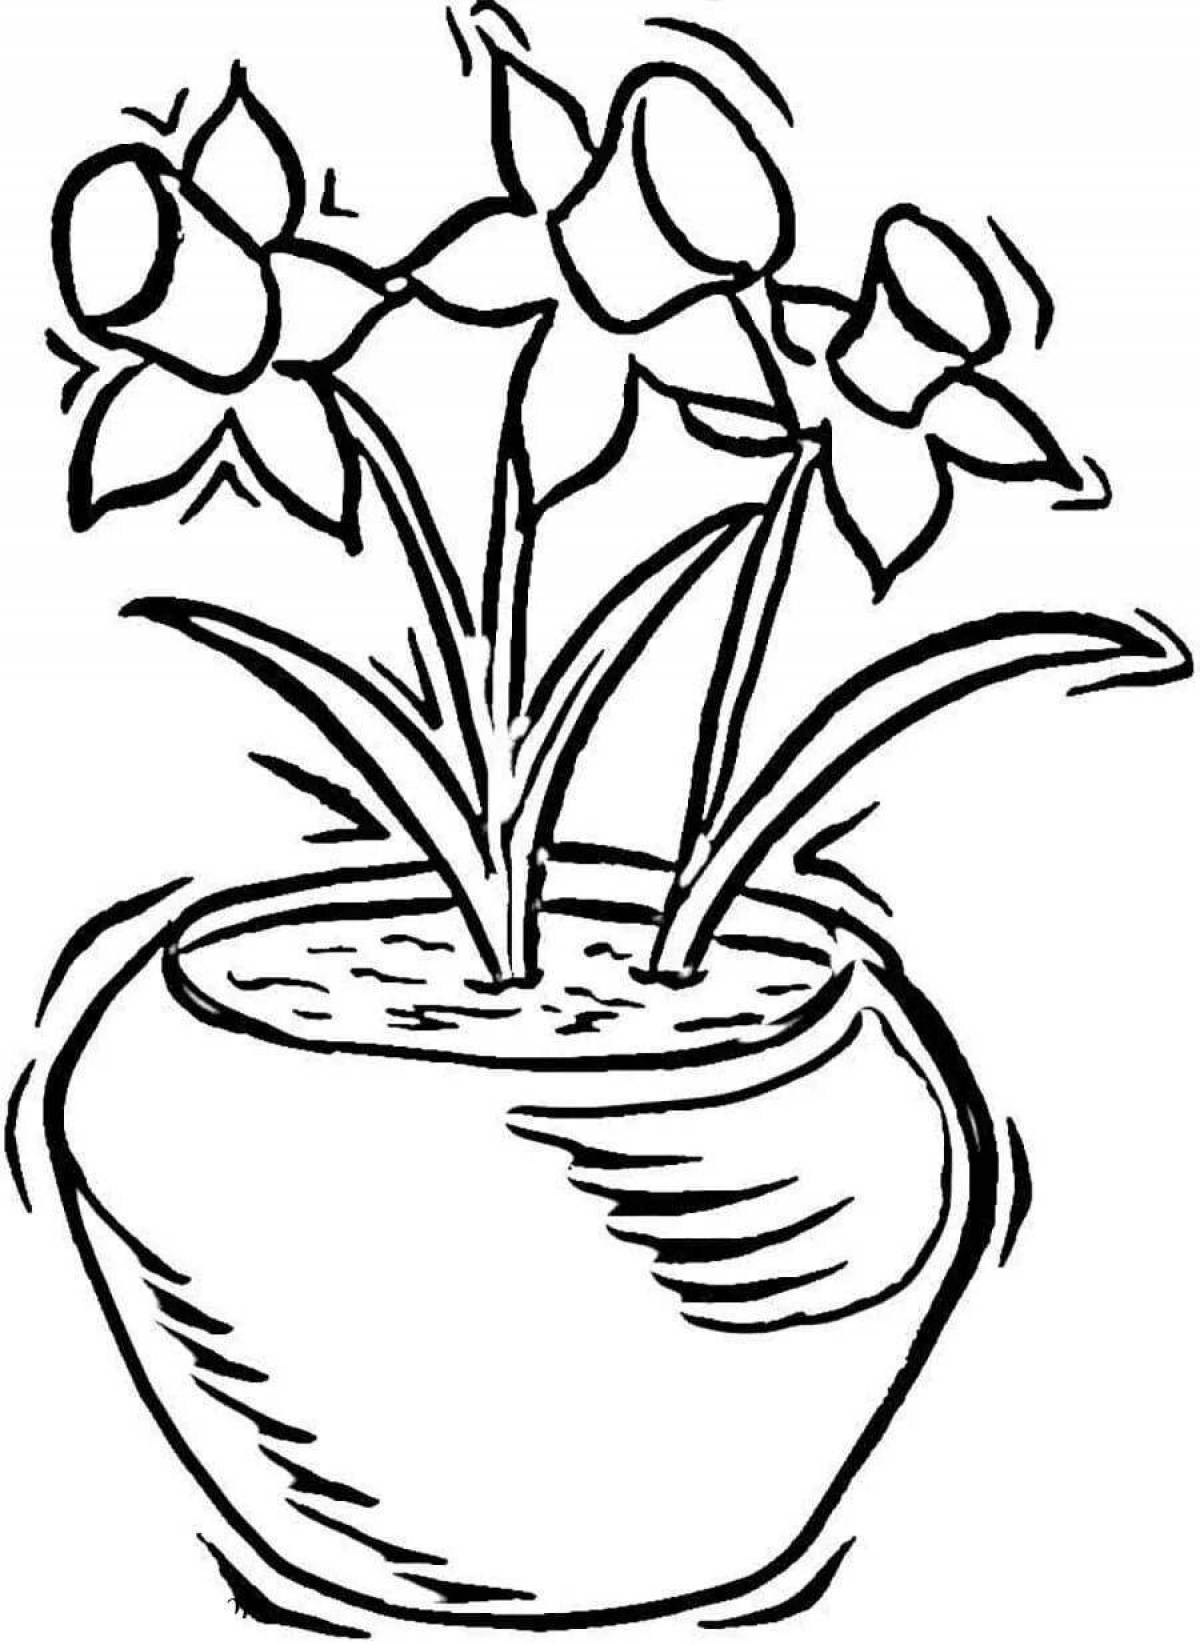 Awesome flower pot coloring page for kids